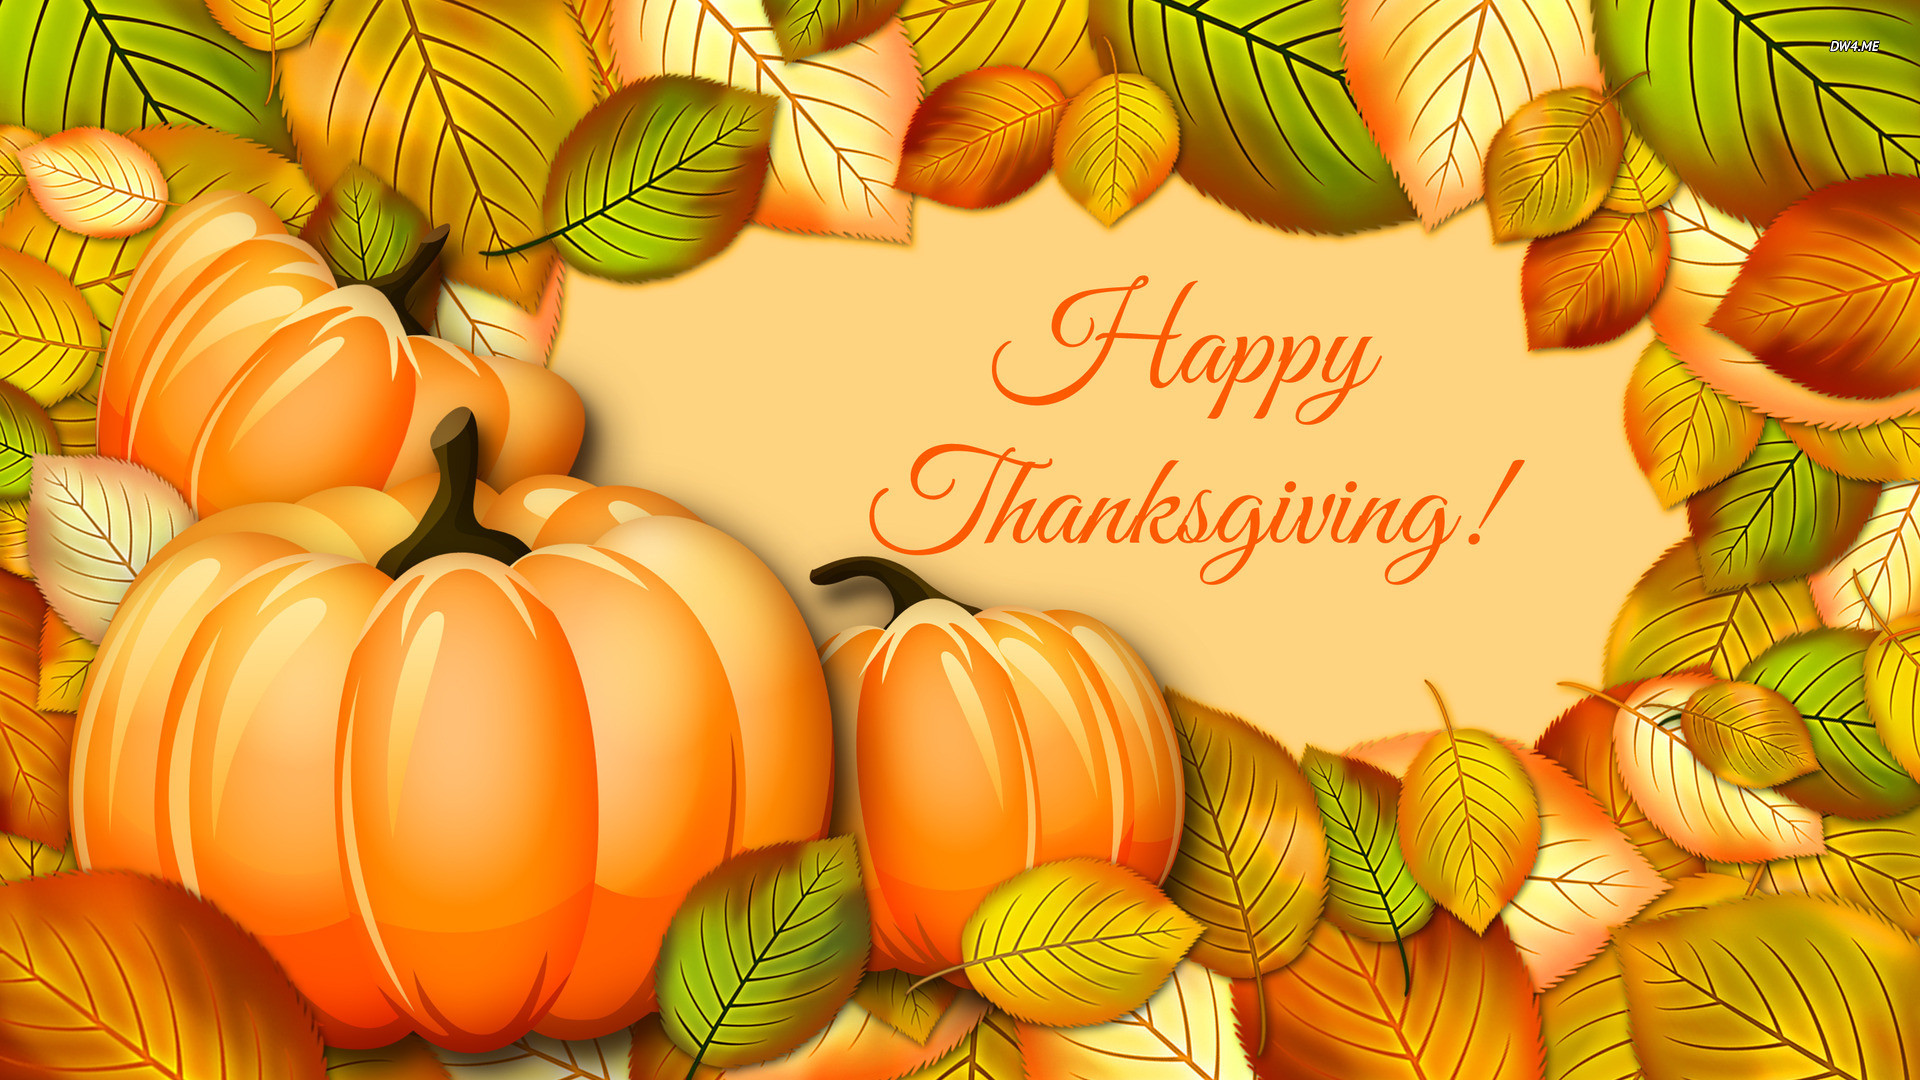 1920x1080 happy thanksgiving images hd wallpapers 4k high definition tablet smart  phones colourful desktop wallpapers 1080p 1920Ã1080 Wallpaper HD